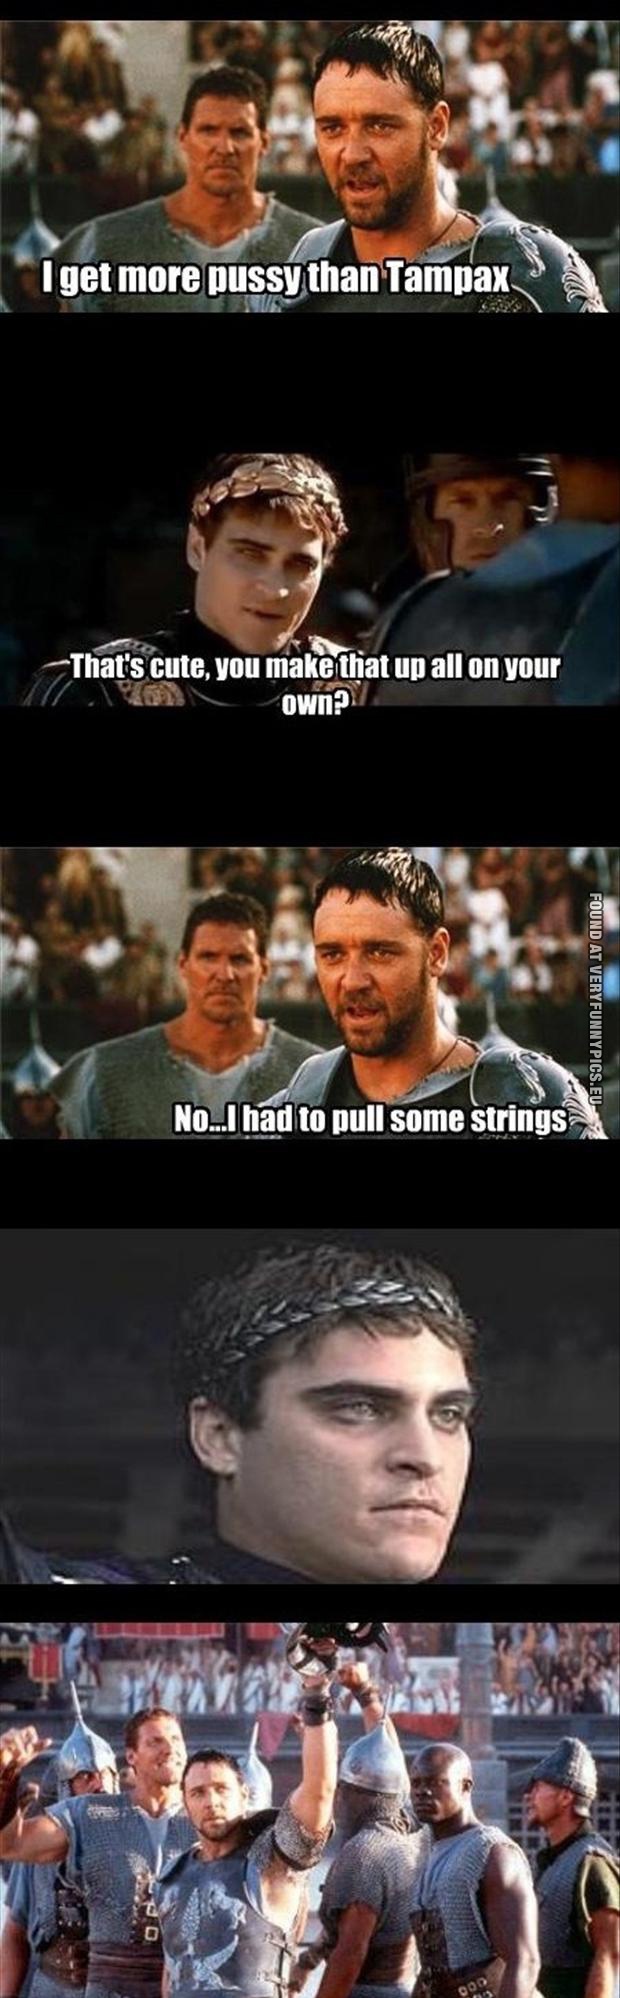 Funny Picture - The Gladiator is funny - Had to pull some strings